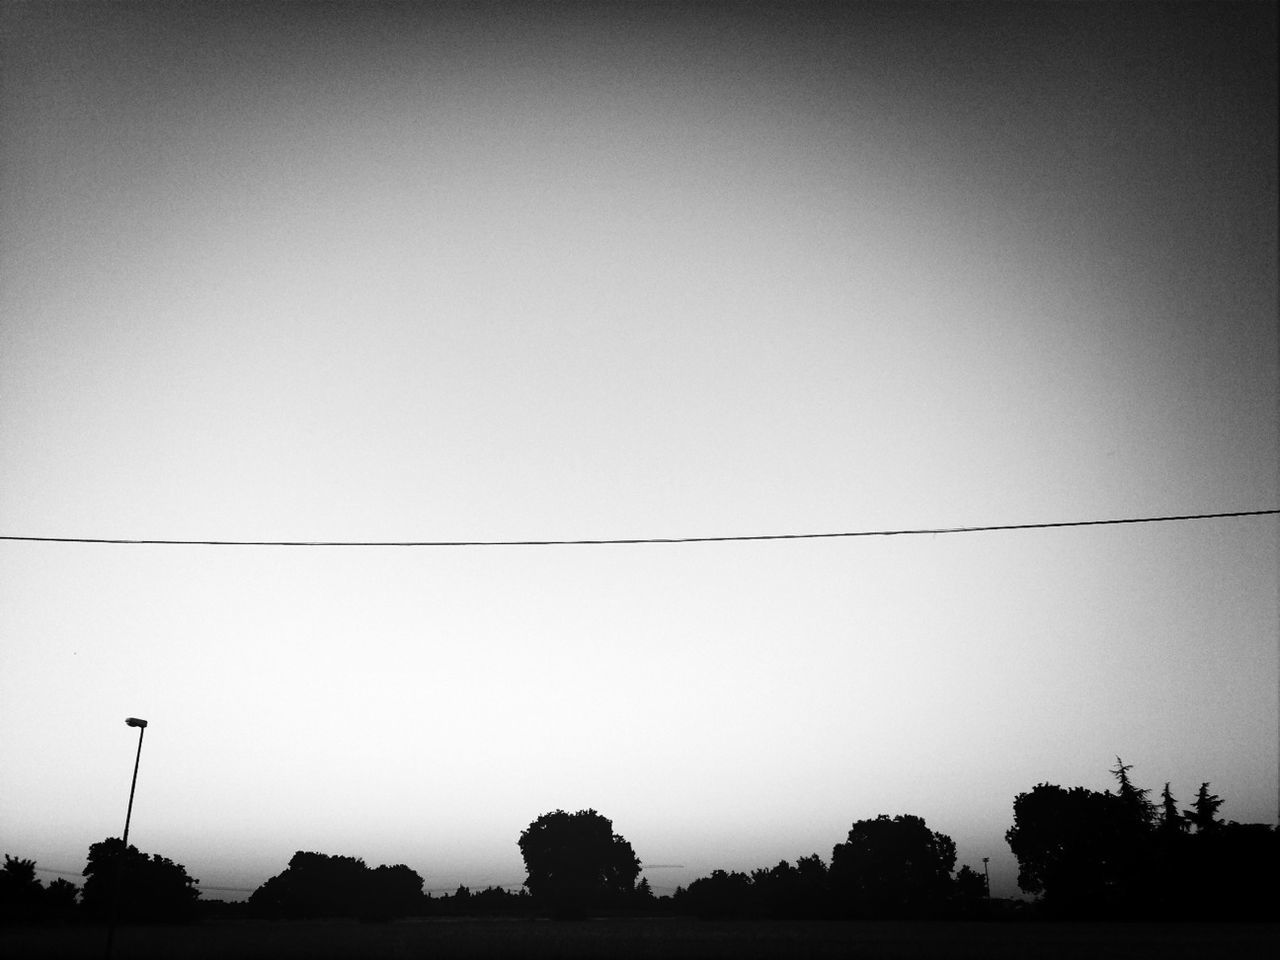 silhouette, copy space, tree, clear sky, tranquility, power line, tranquil scene, nature, sky, low angle view, beauty in nature, dusk, scenics, outdoors, electricity pylon, electricity, no people, connection, cable, street light